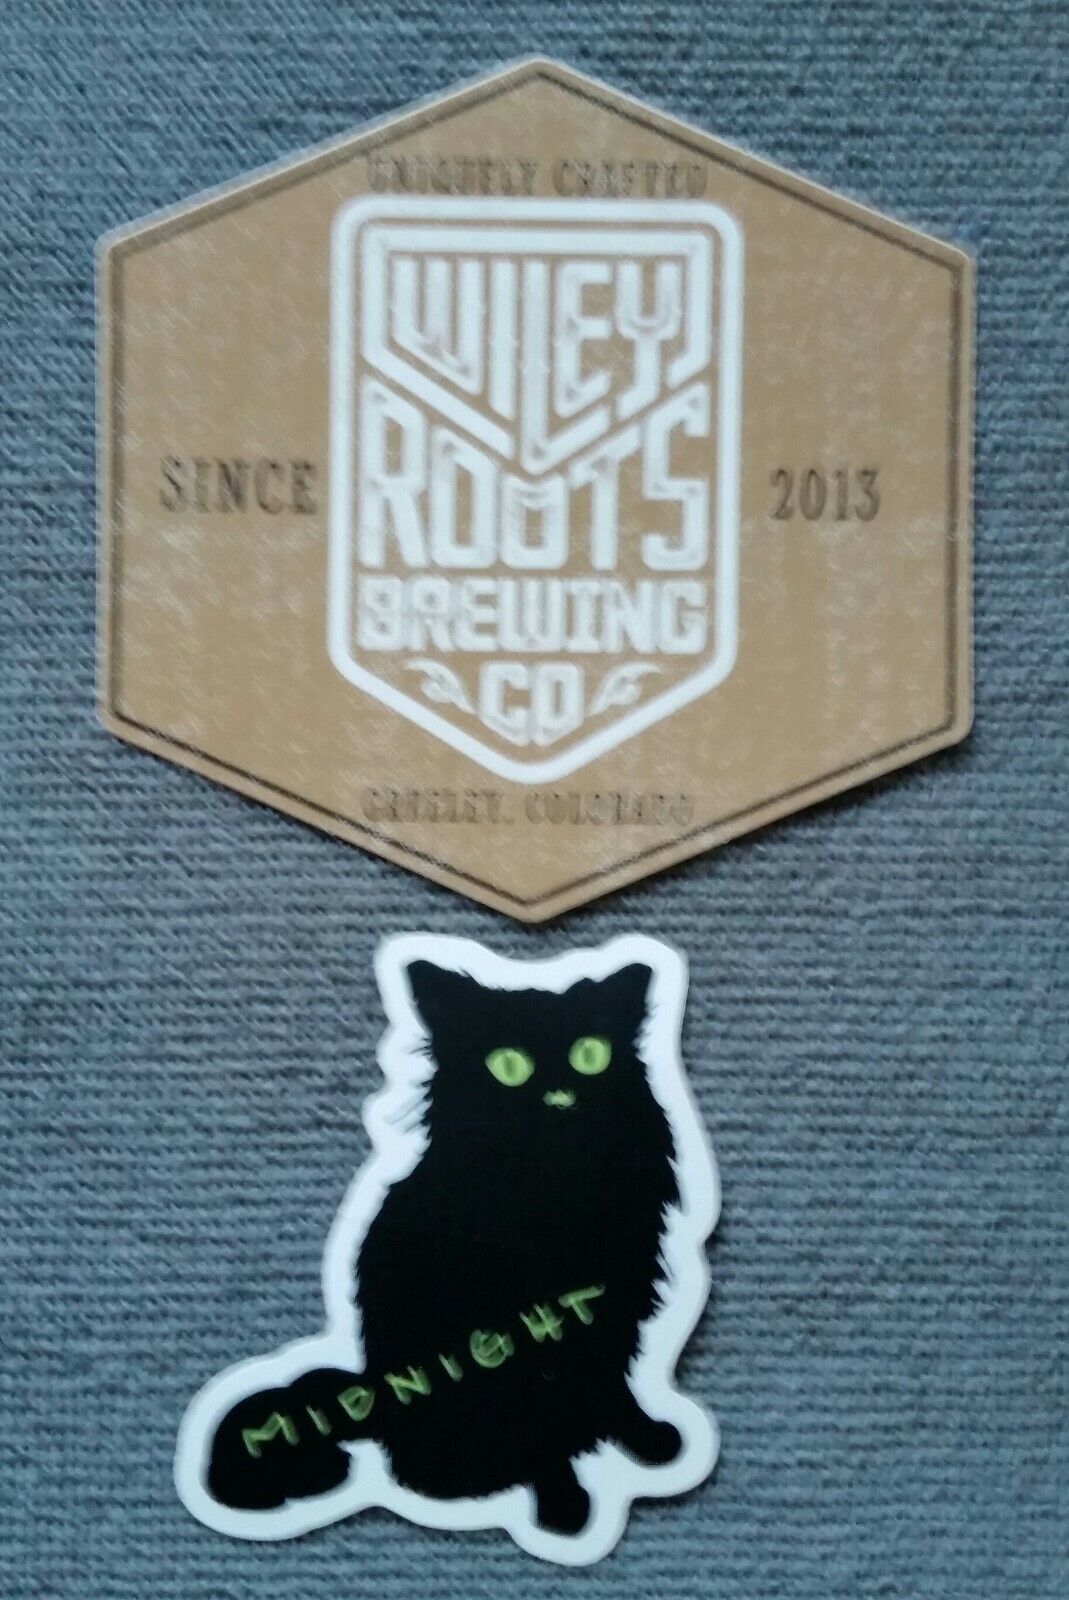 2 WILEY ROOTS BREWING STICKERS ~ 4' x 4